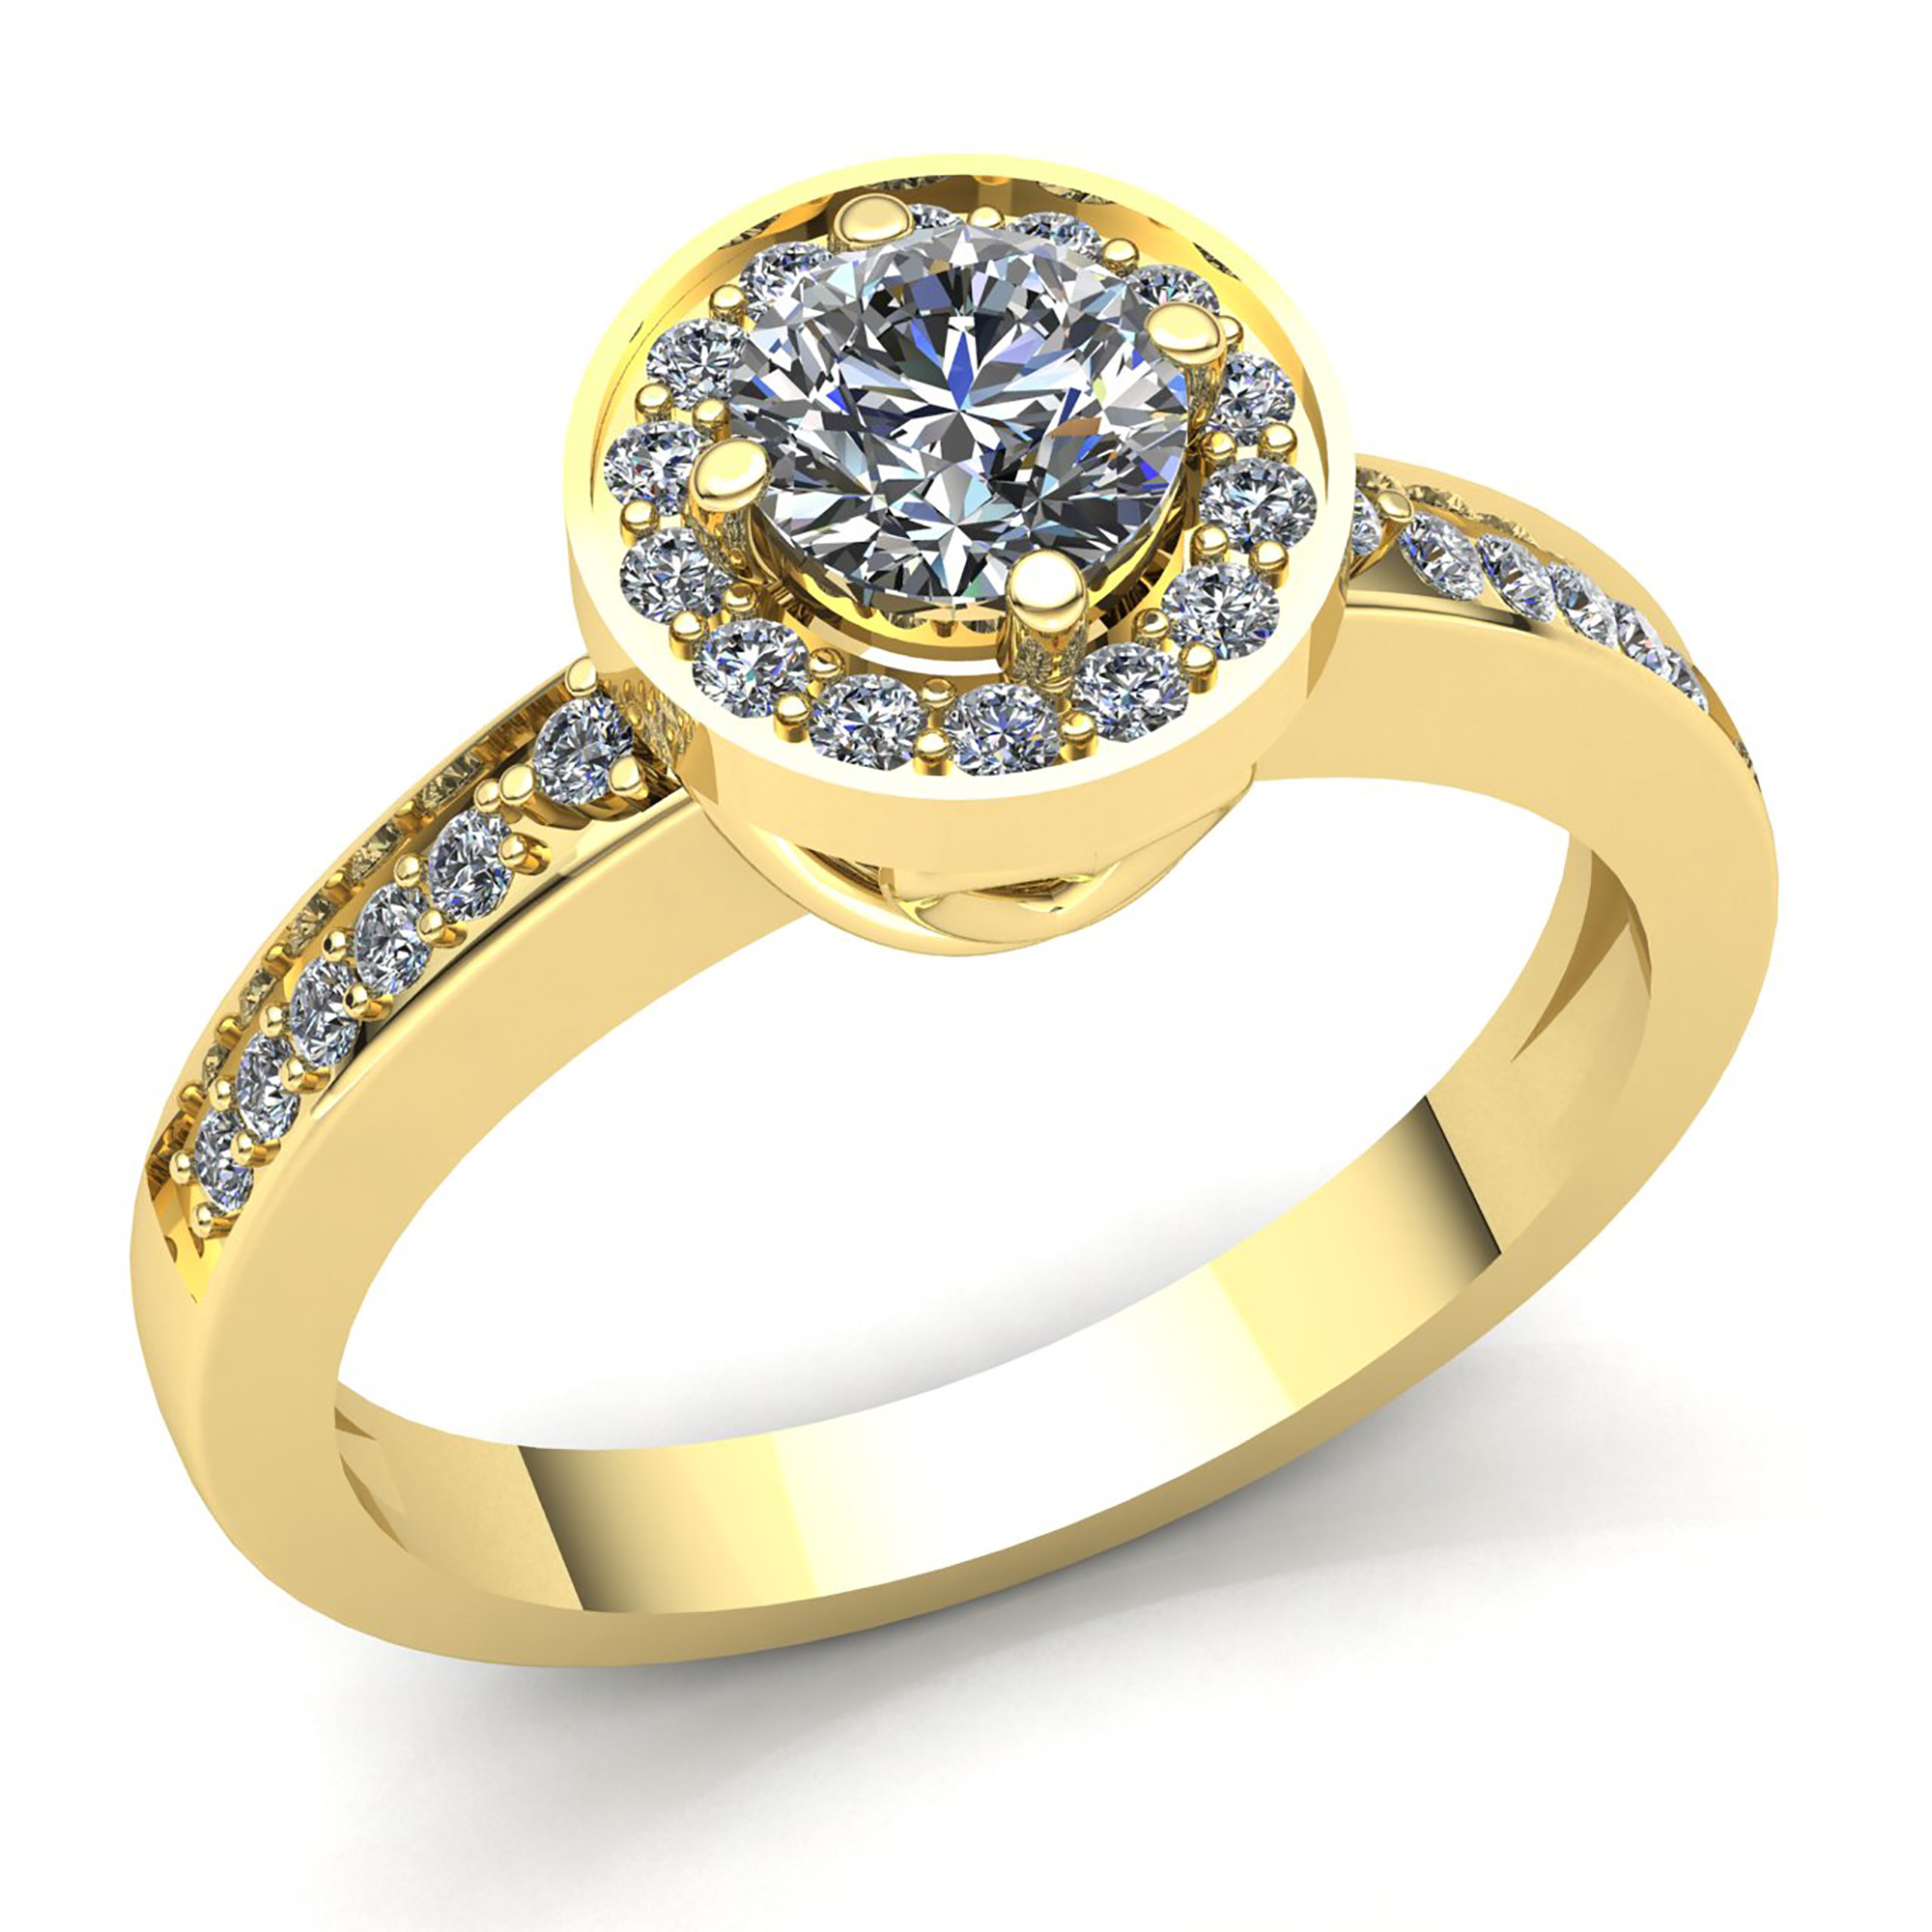 Pre-owned Jewelwesell 0.33ctw Round Cut Diamond Ladies Solitaire Halo Engagement Ring 10k Gold